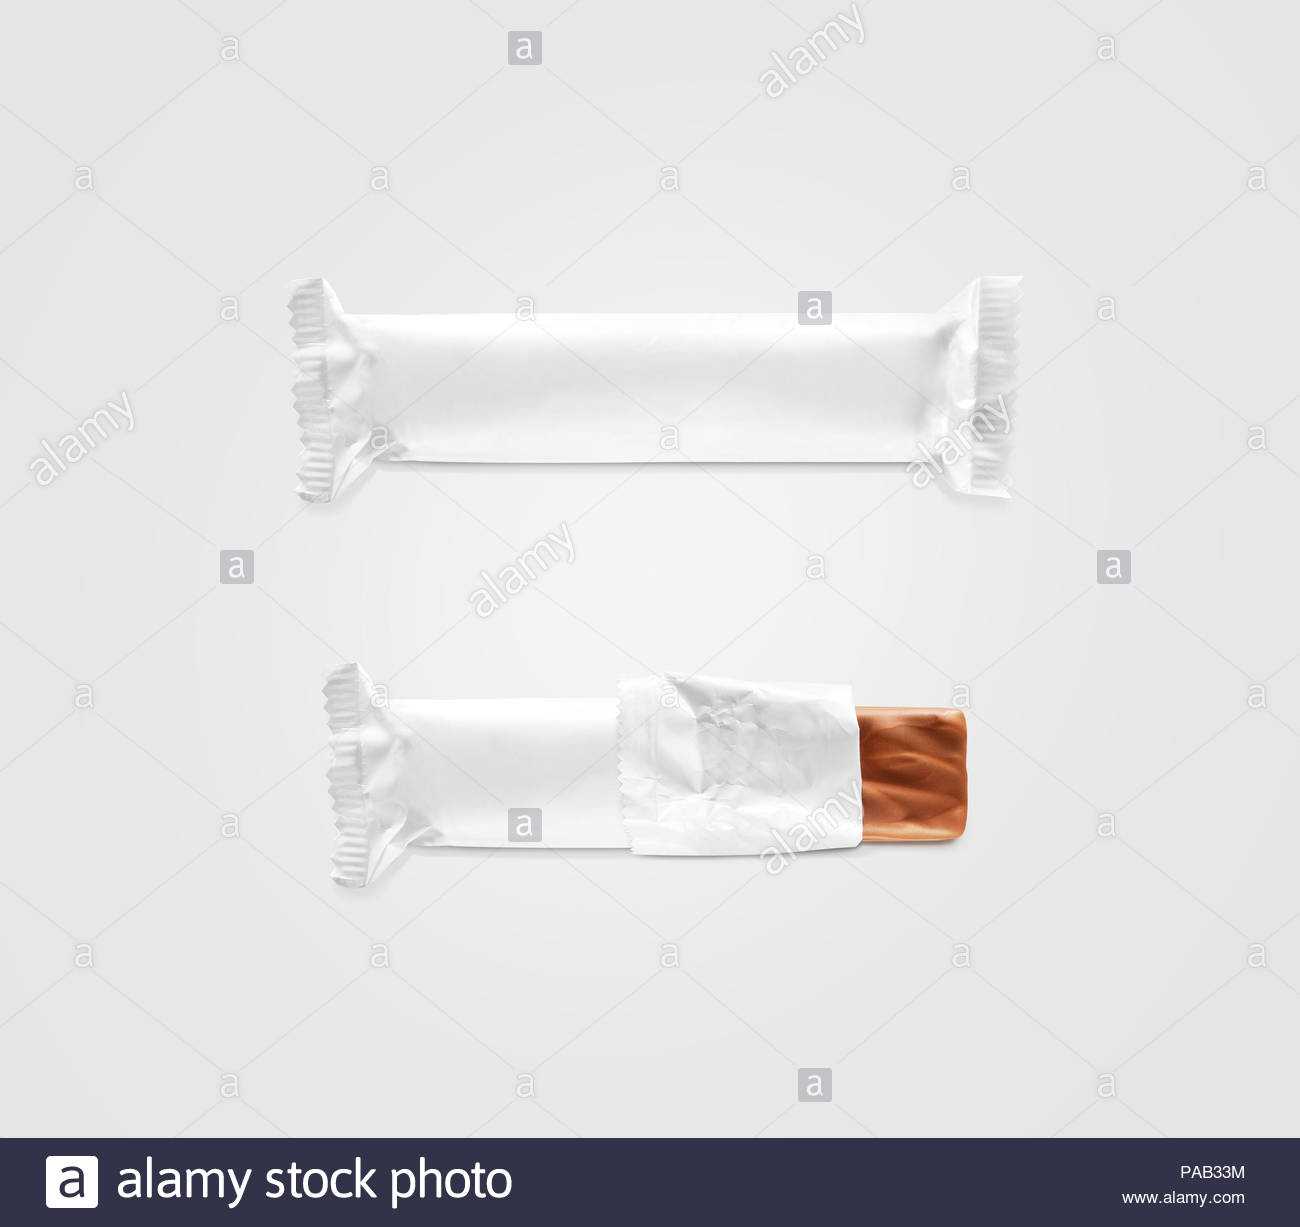 Blank White Candy Bar Plastic Wrap Mockup Isolated. Closed In Blank Candy Bar Wrapper Template